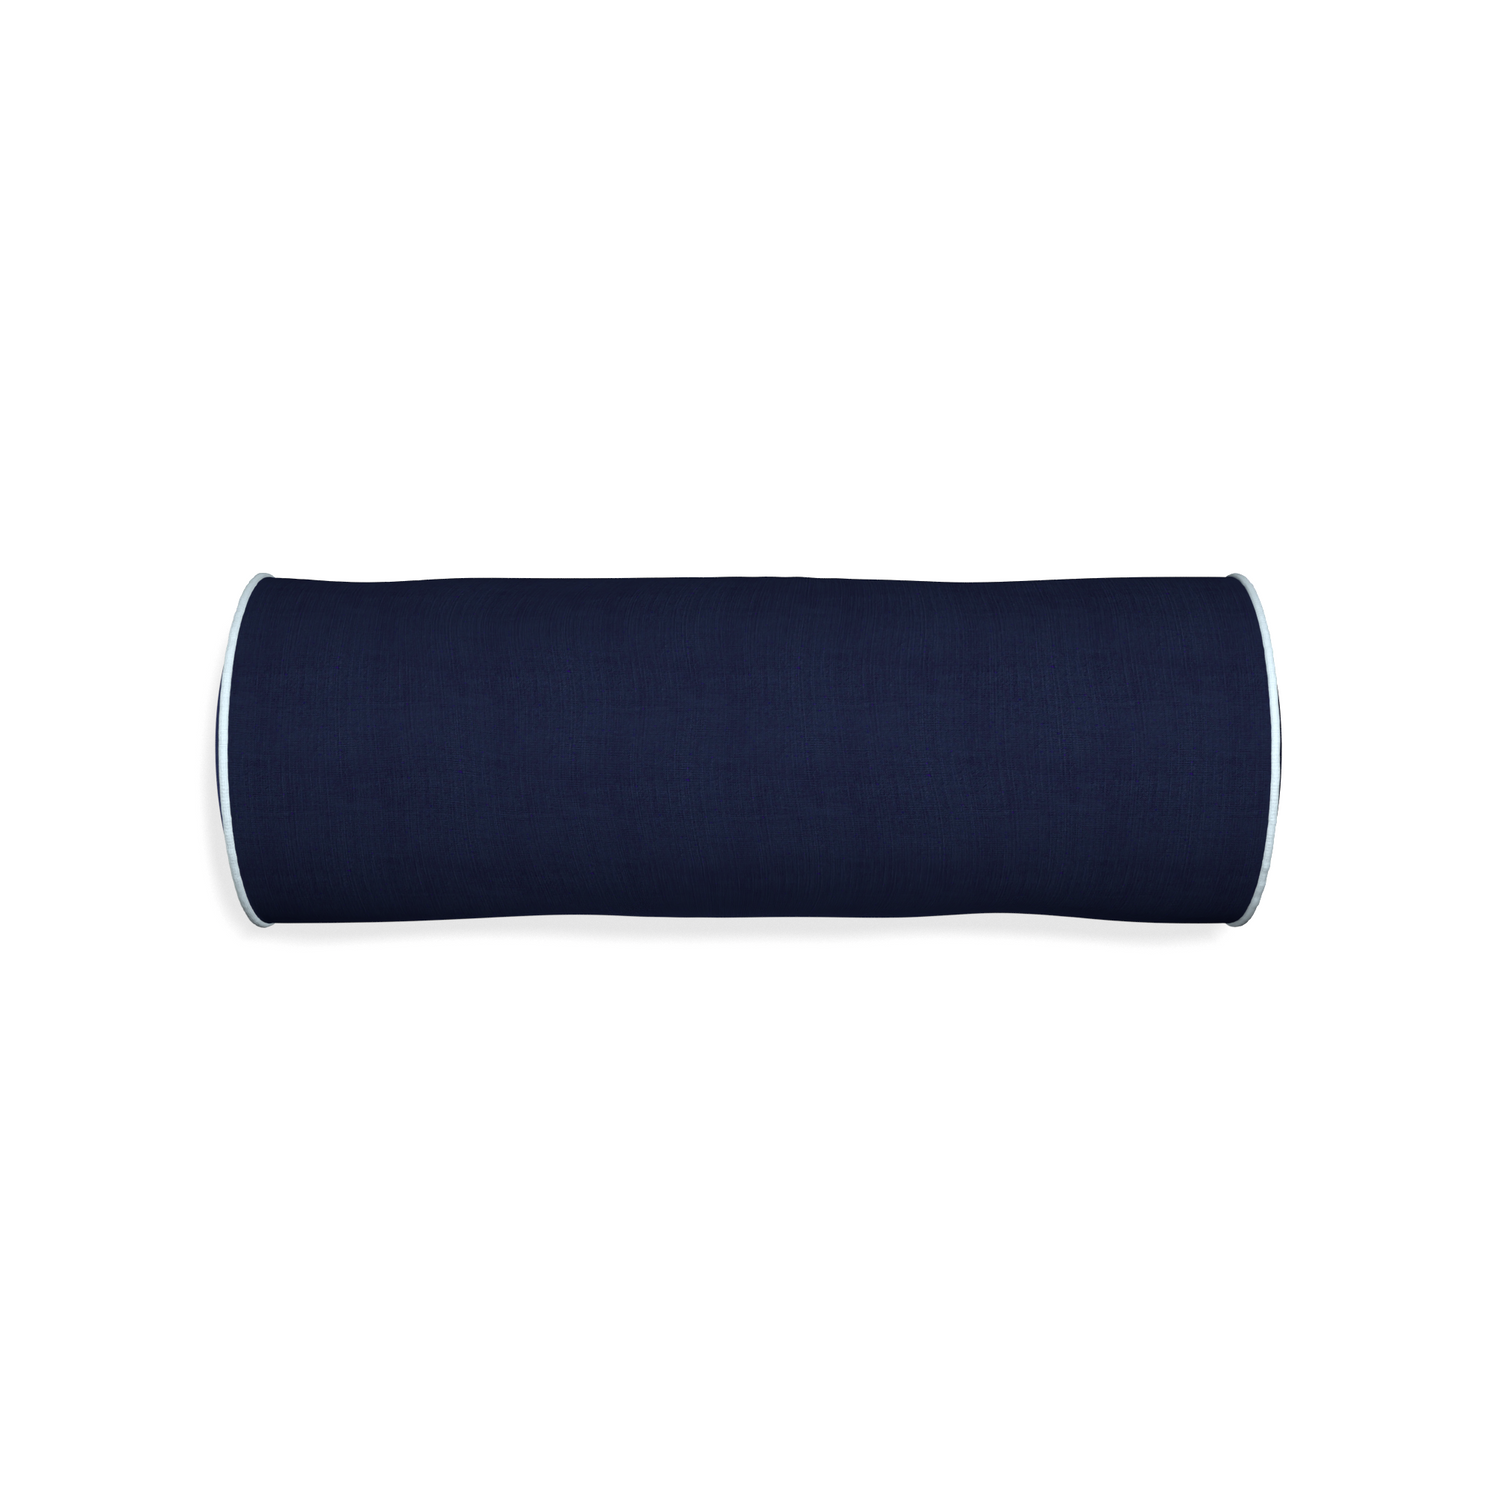 Bolster midnight custom navy bluepillow with powder piping on white background